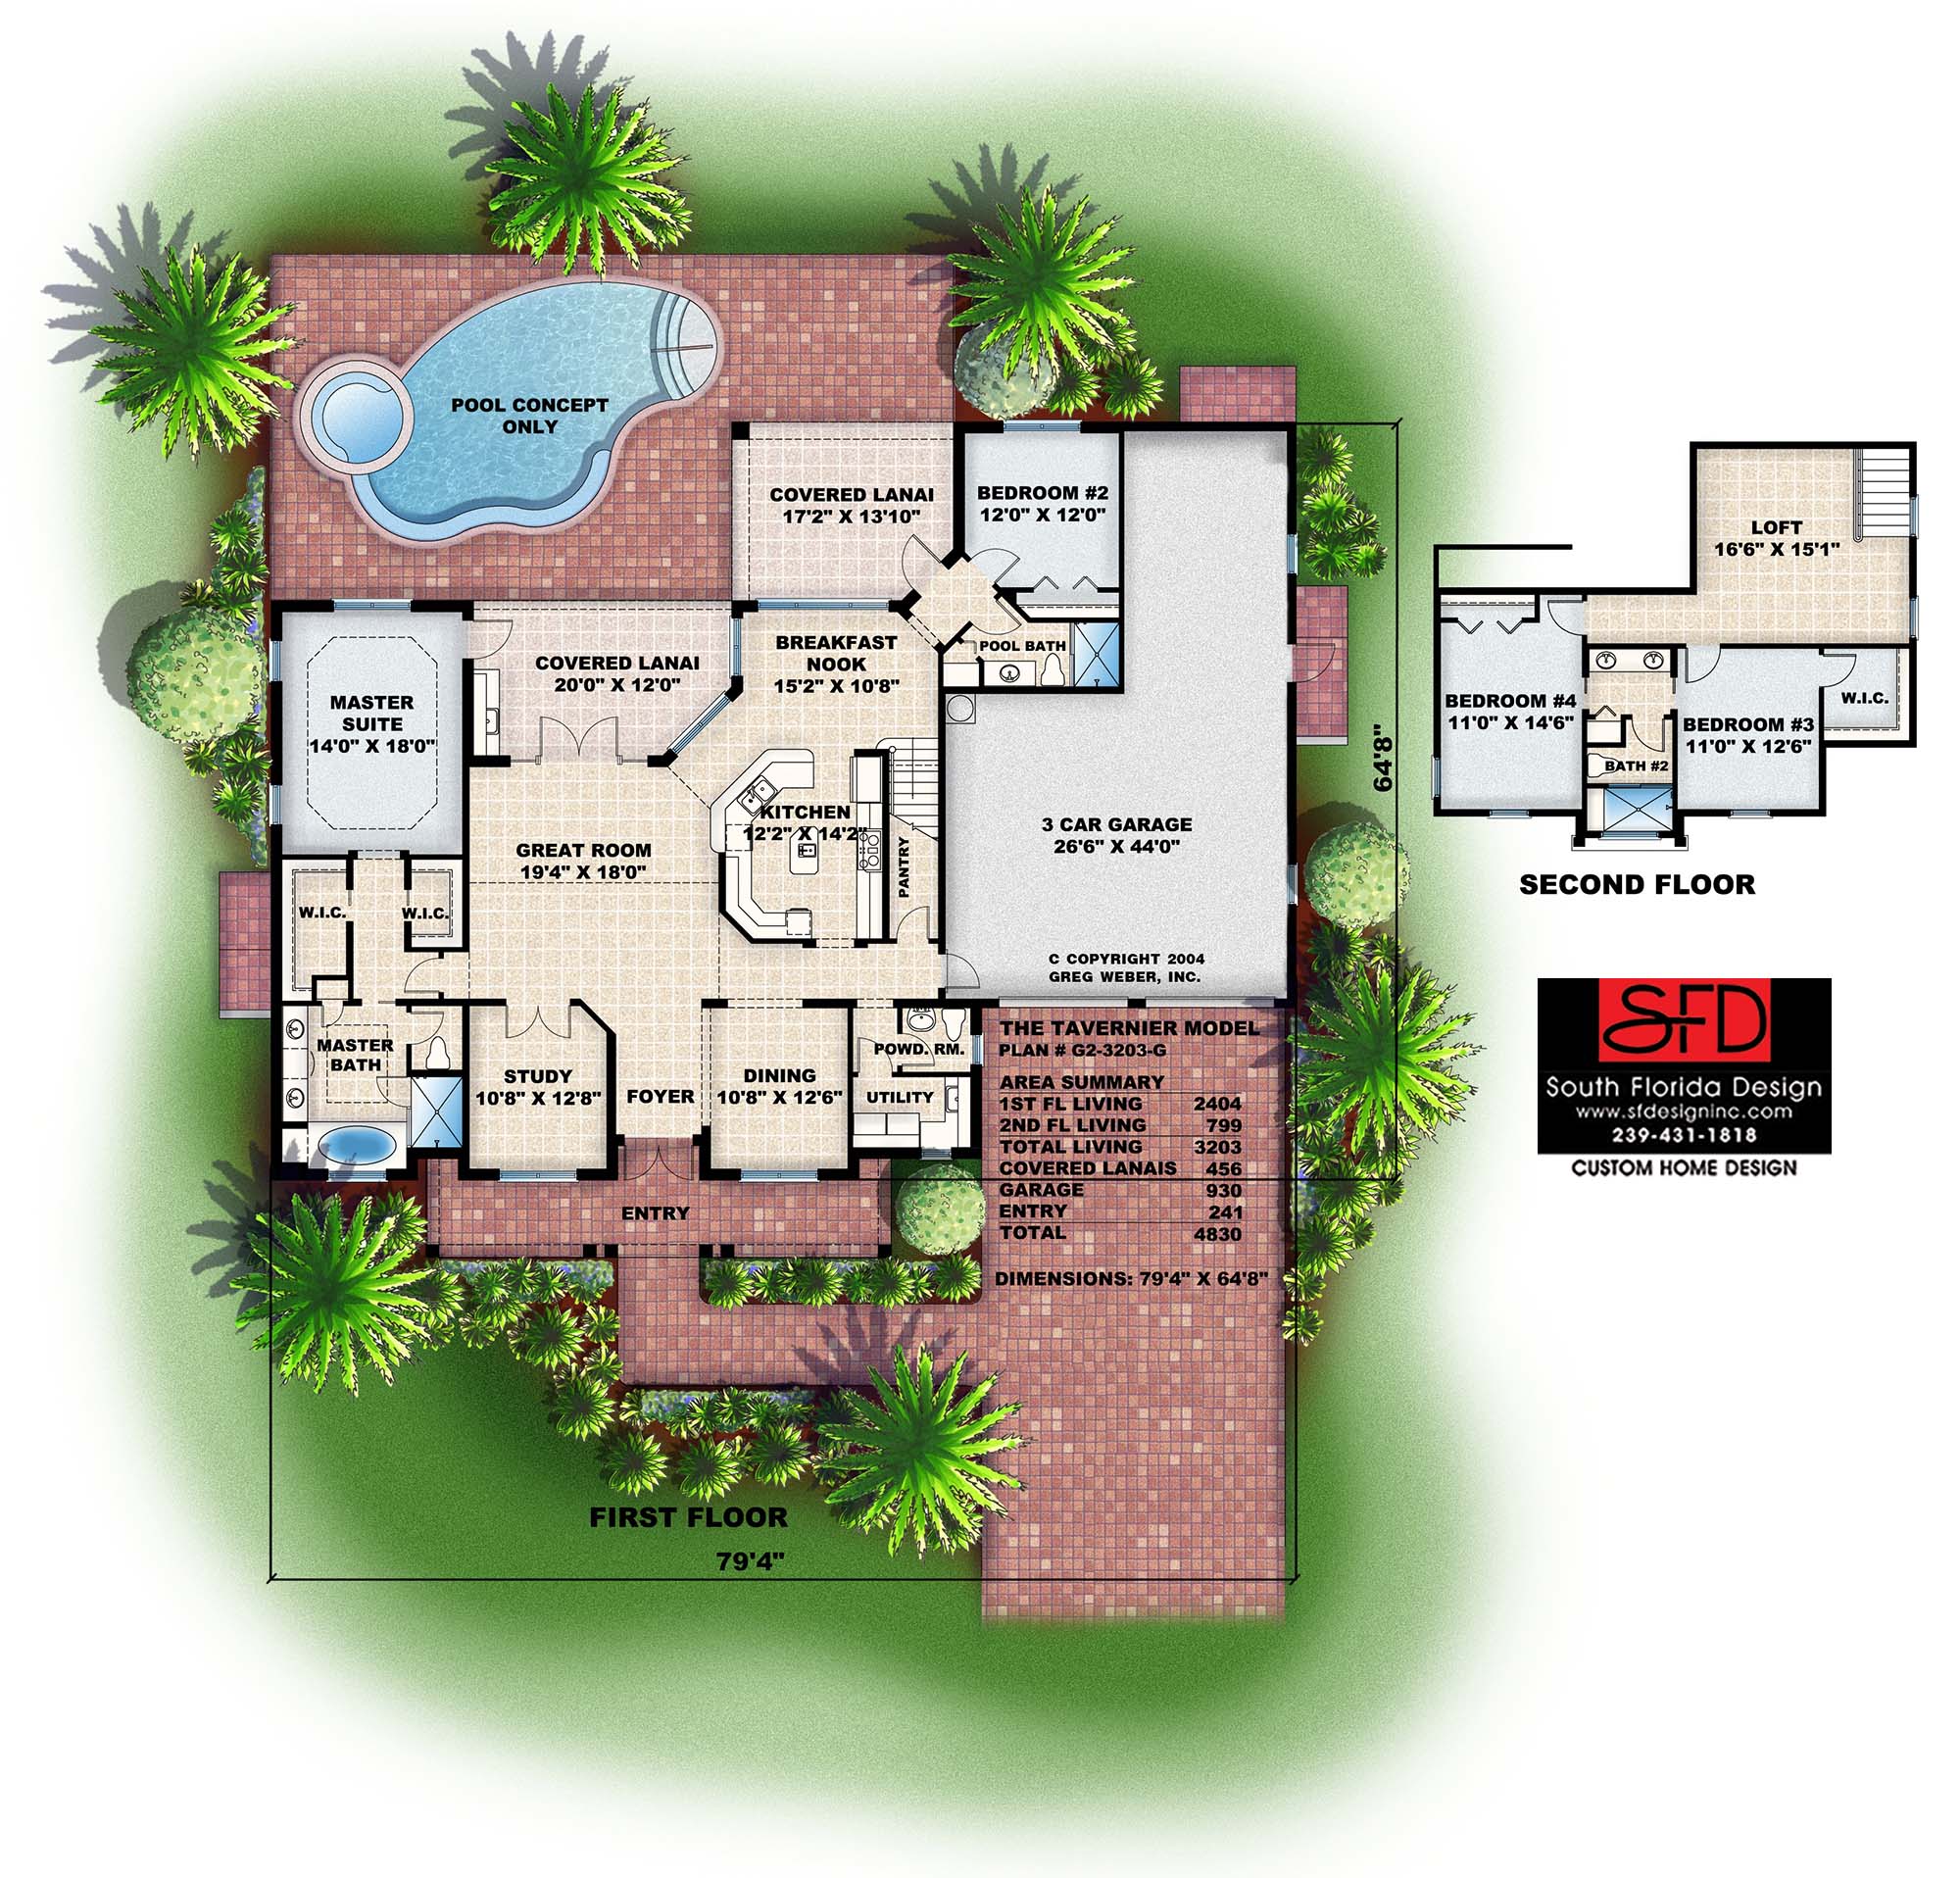 South Florida Designs Key West Style House Plan With 4